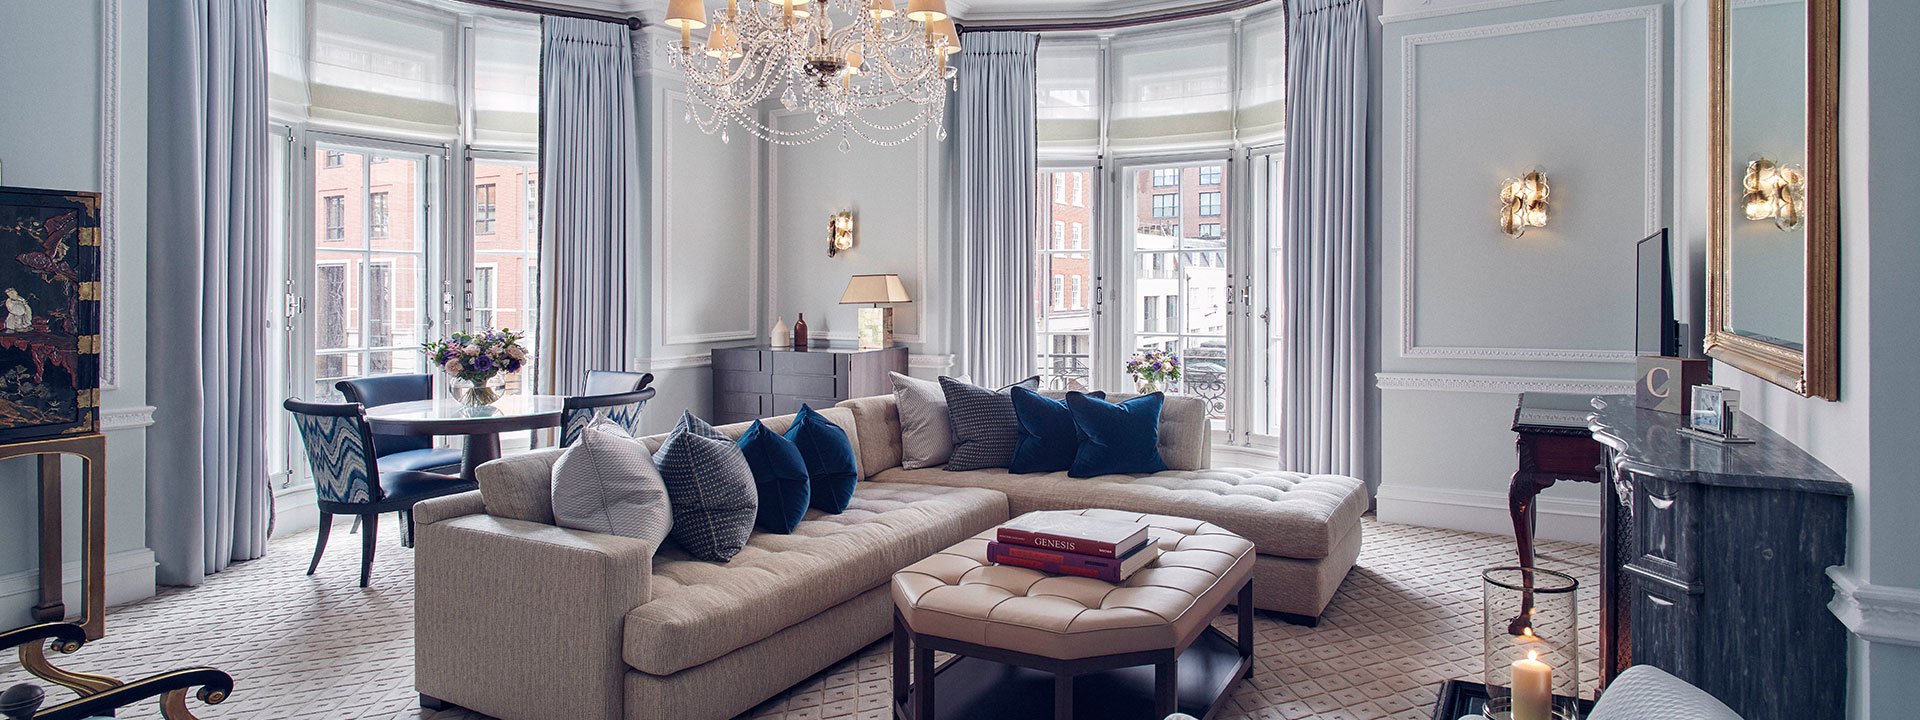 A view of part of the Corner Suite, which exudes luxury through beige and blue tones of materials.